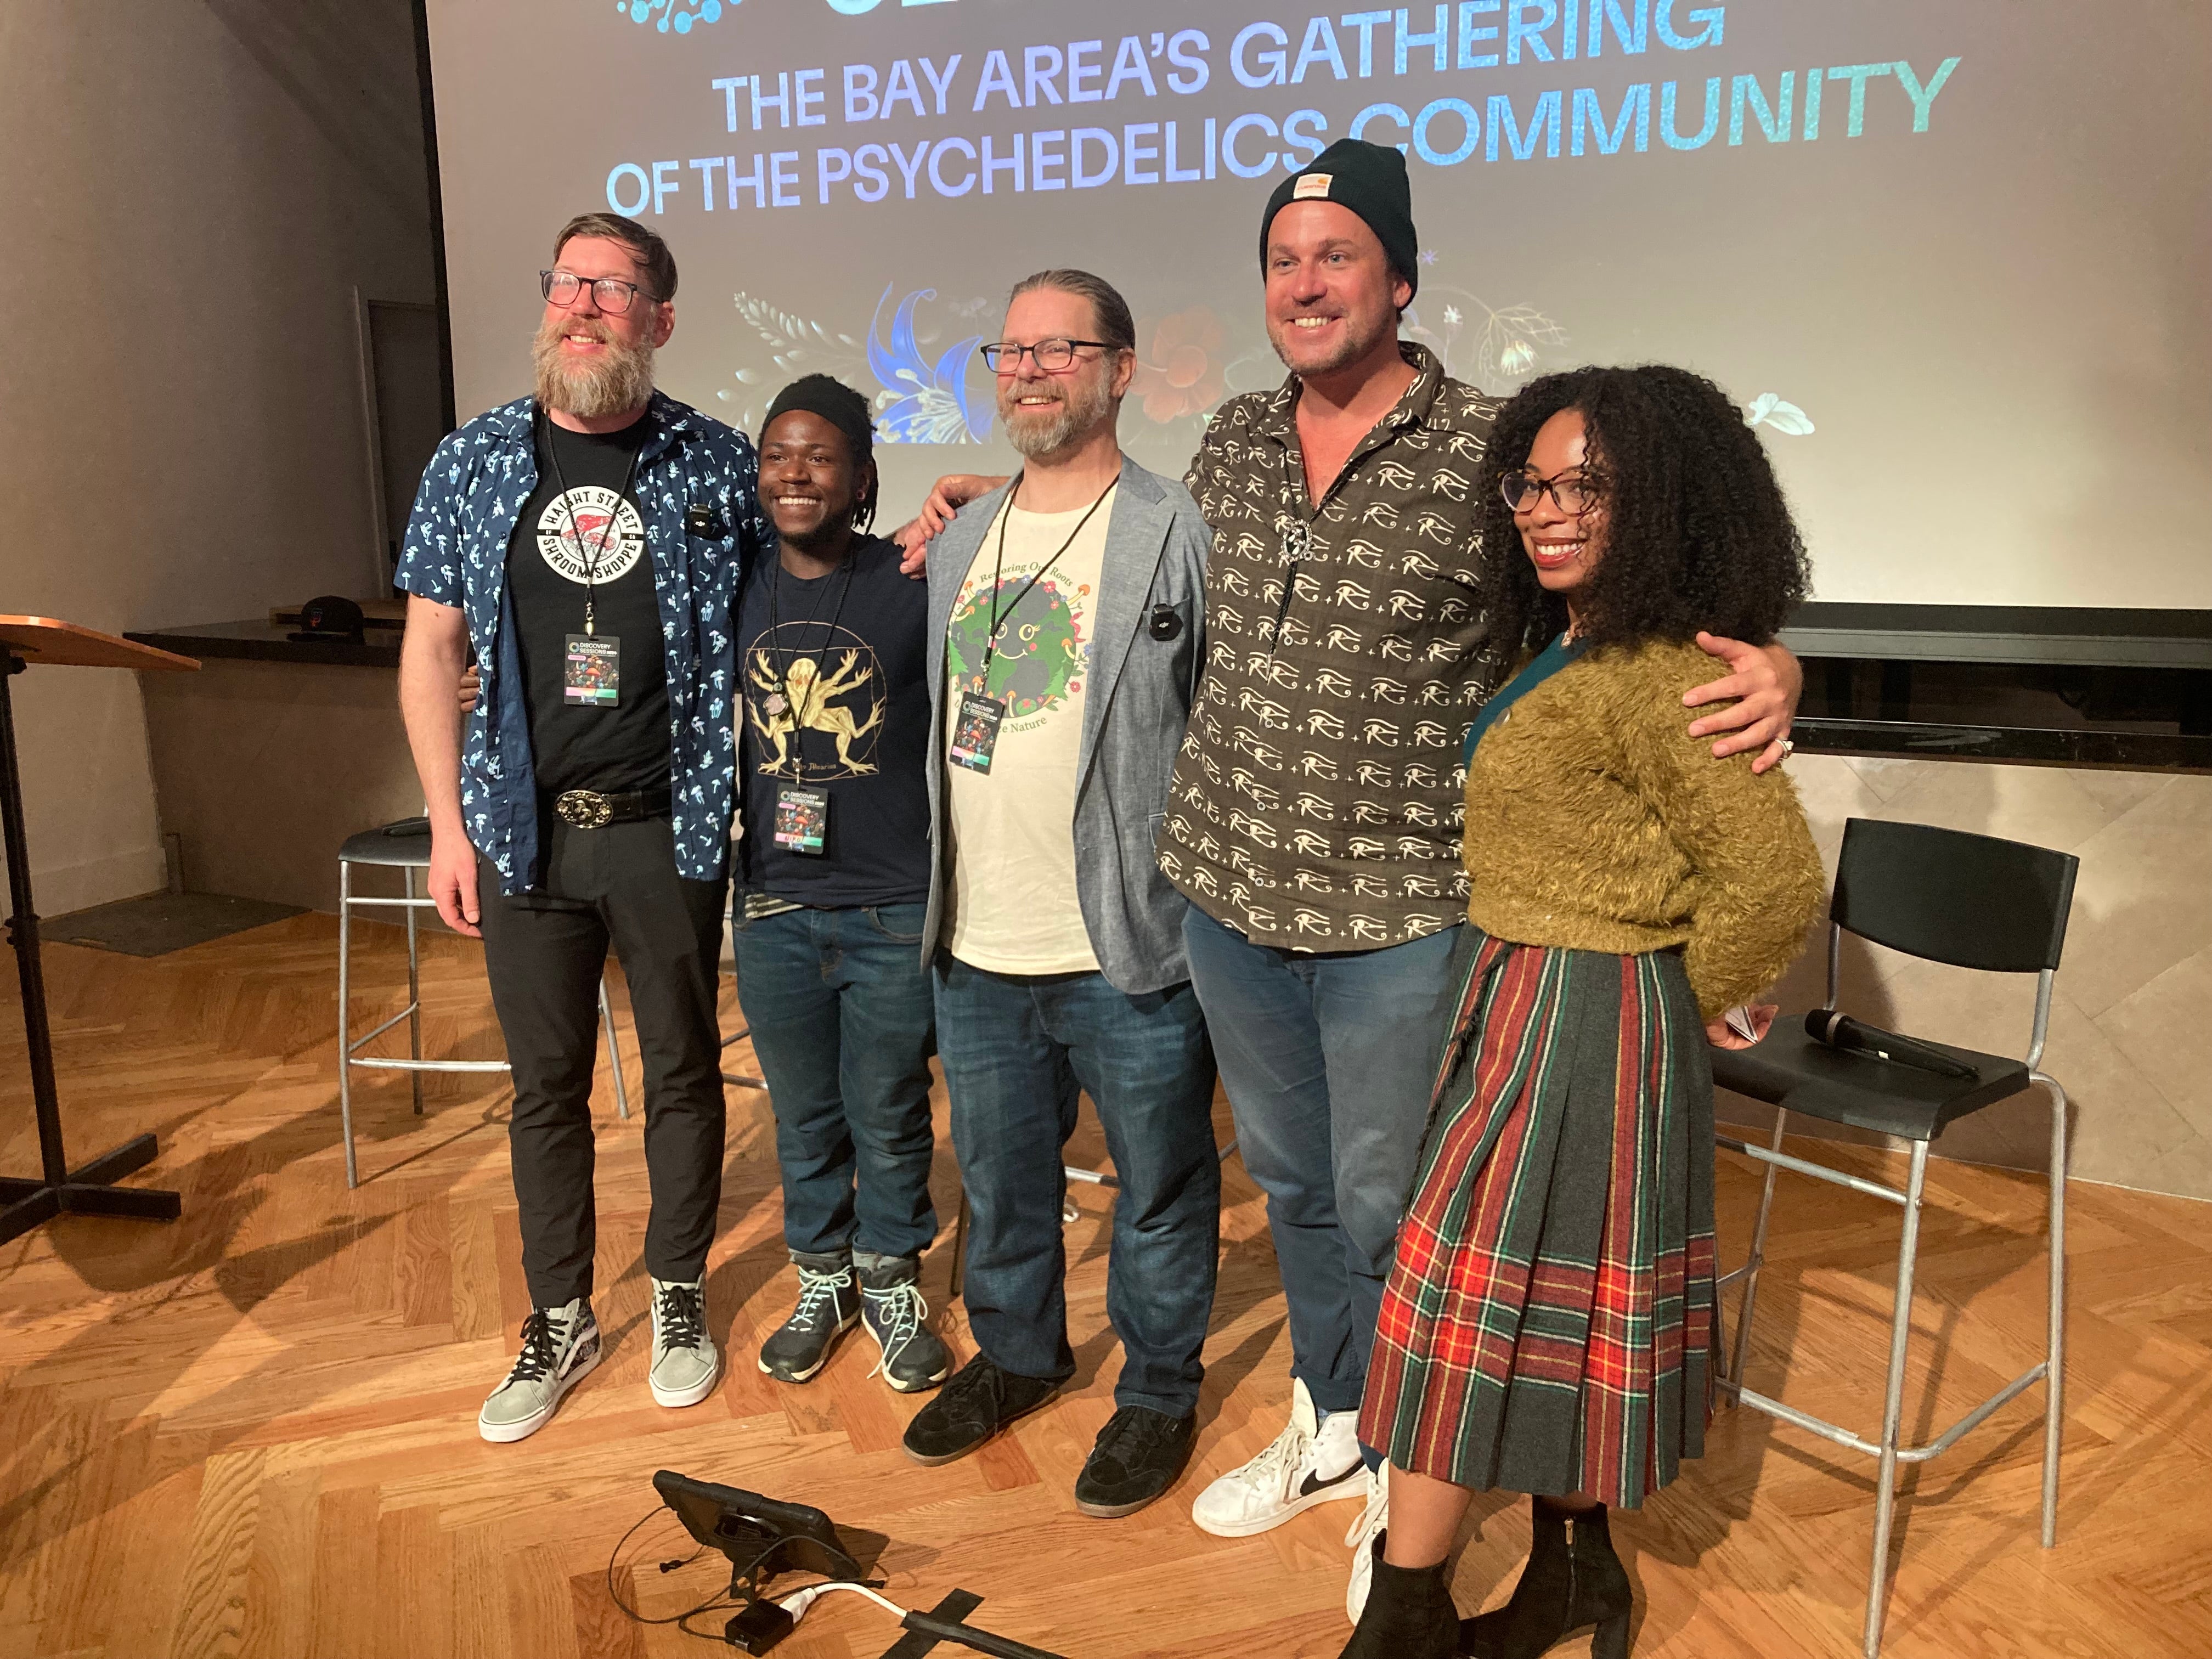 Niko Summers, second from left, Larry Norris, middle, and Dennis Walker, second from right, pose after a panel on psychedelic entrepreneurship